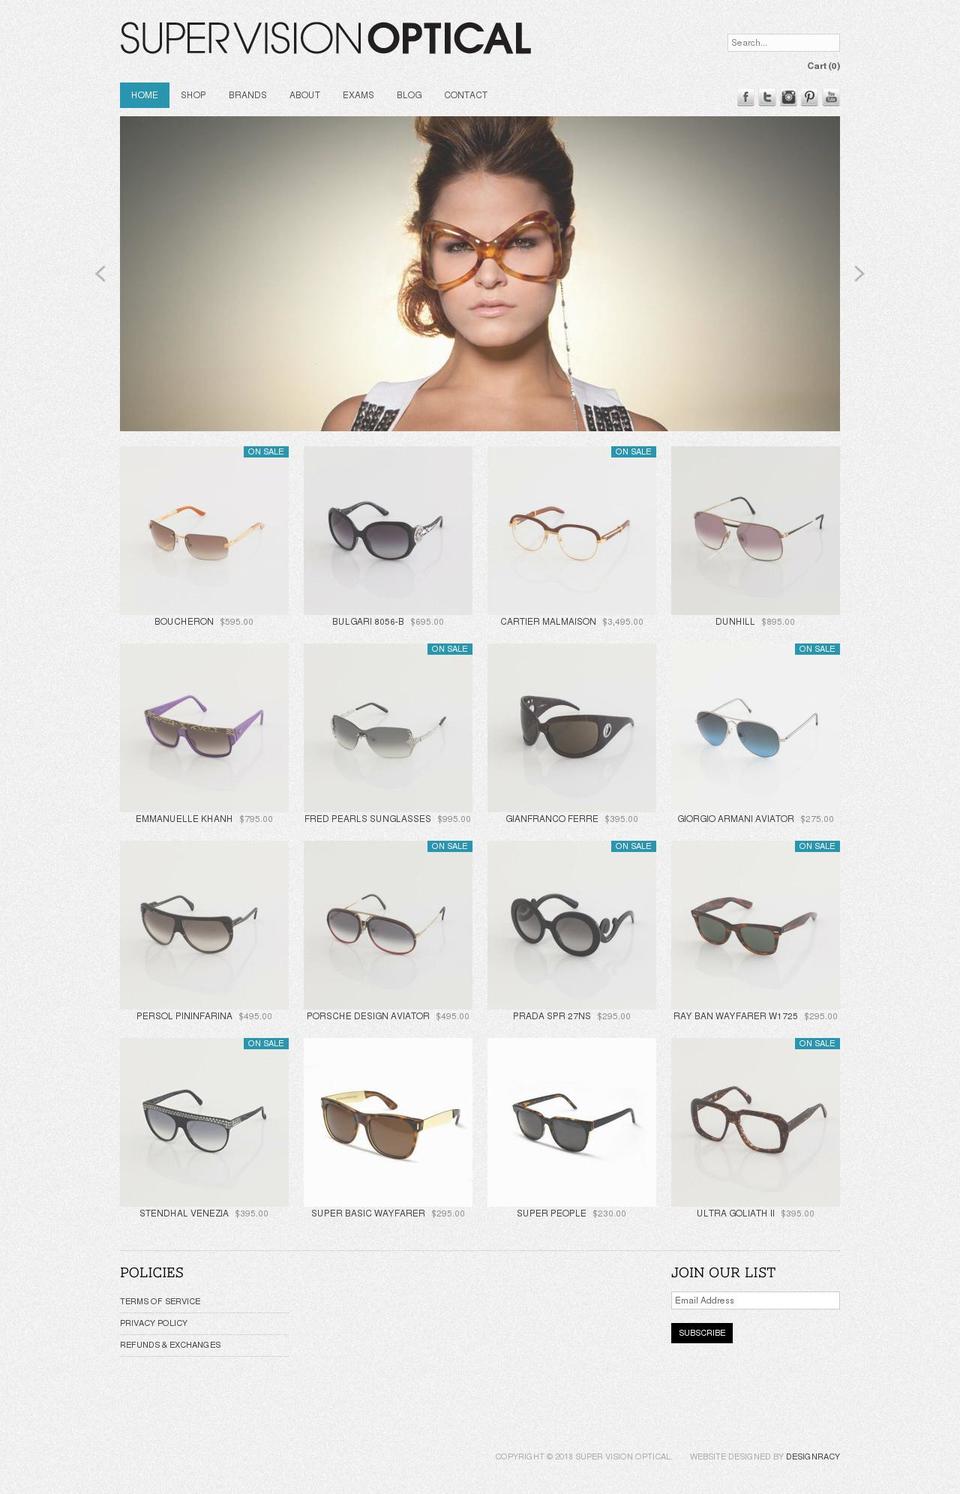 Zenith Shopify theme site example supervisionoptical.org